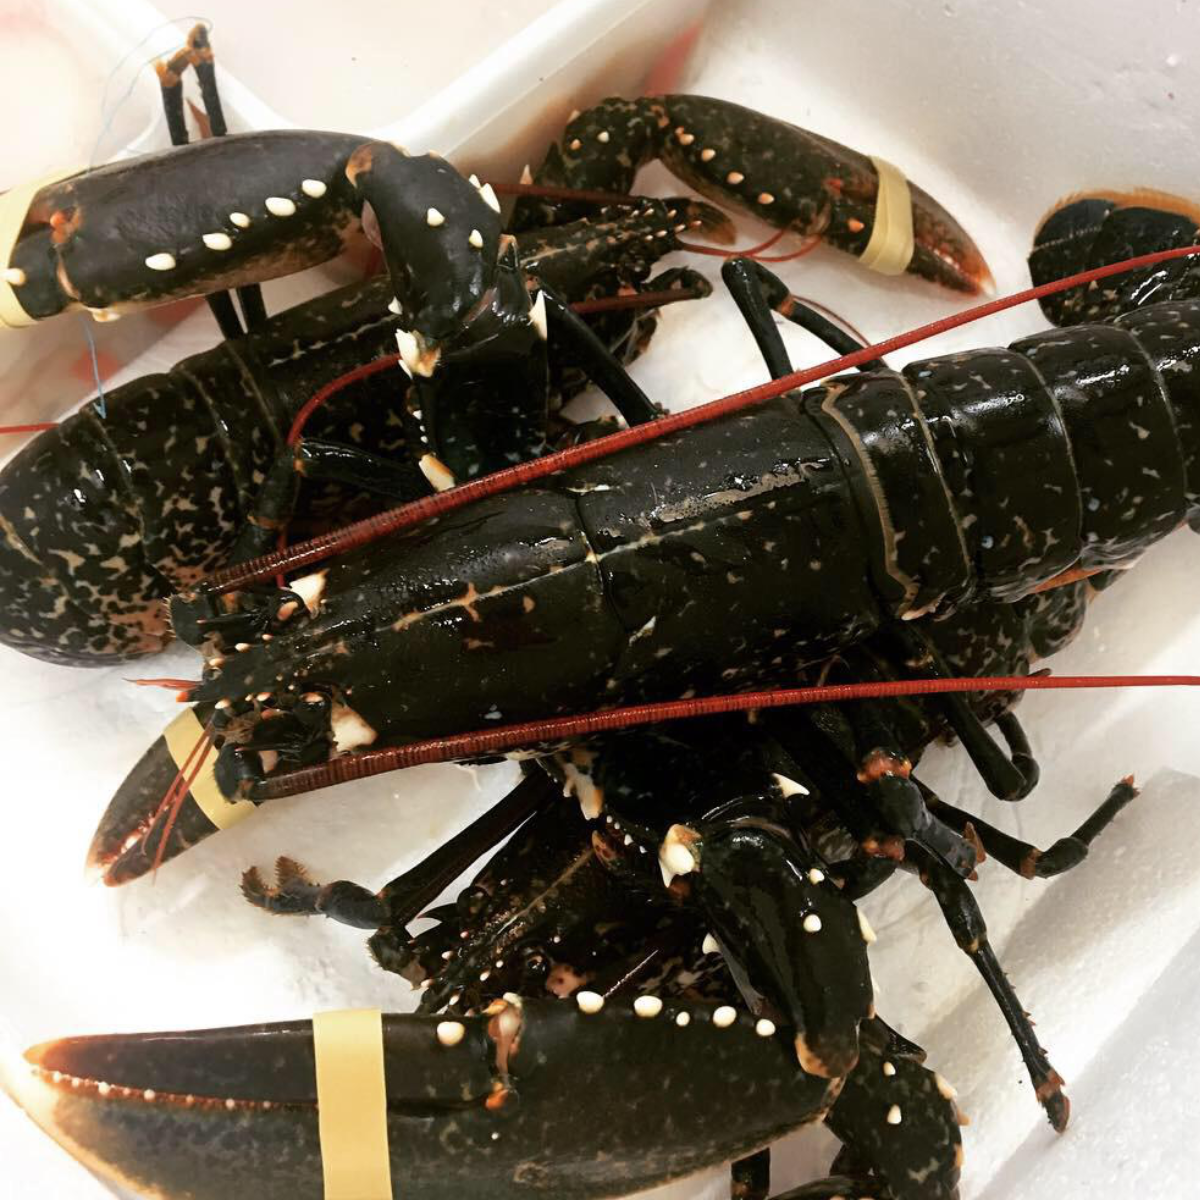 Enjoy a stunning Lobster delivered to your door. We deliver to Bristol, Somerset, Bath, Weston Super Mare, Taunton, Newport, North Somerset, and Gloucestershire. Order your fish and meat with us today, order online or by phone.